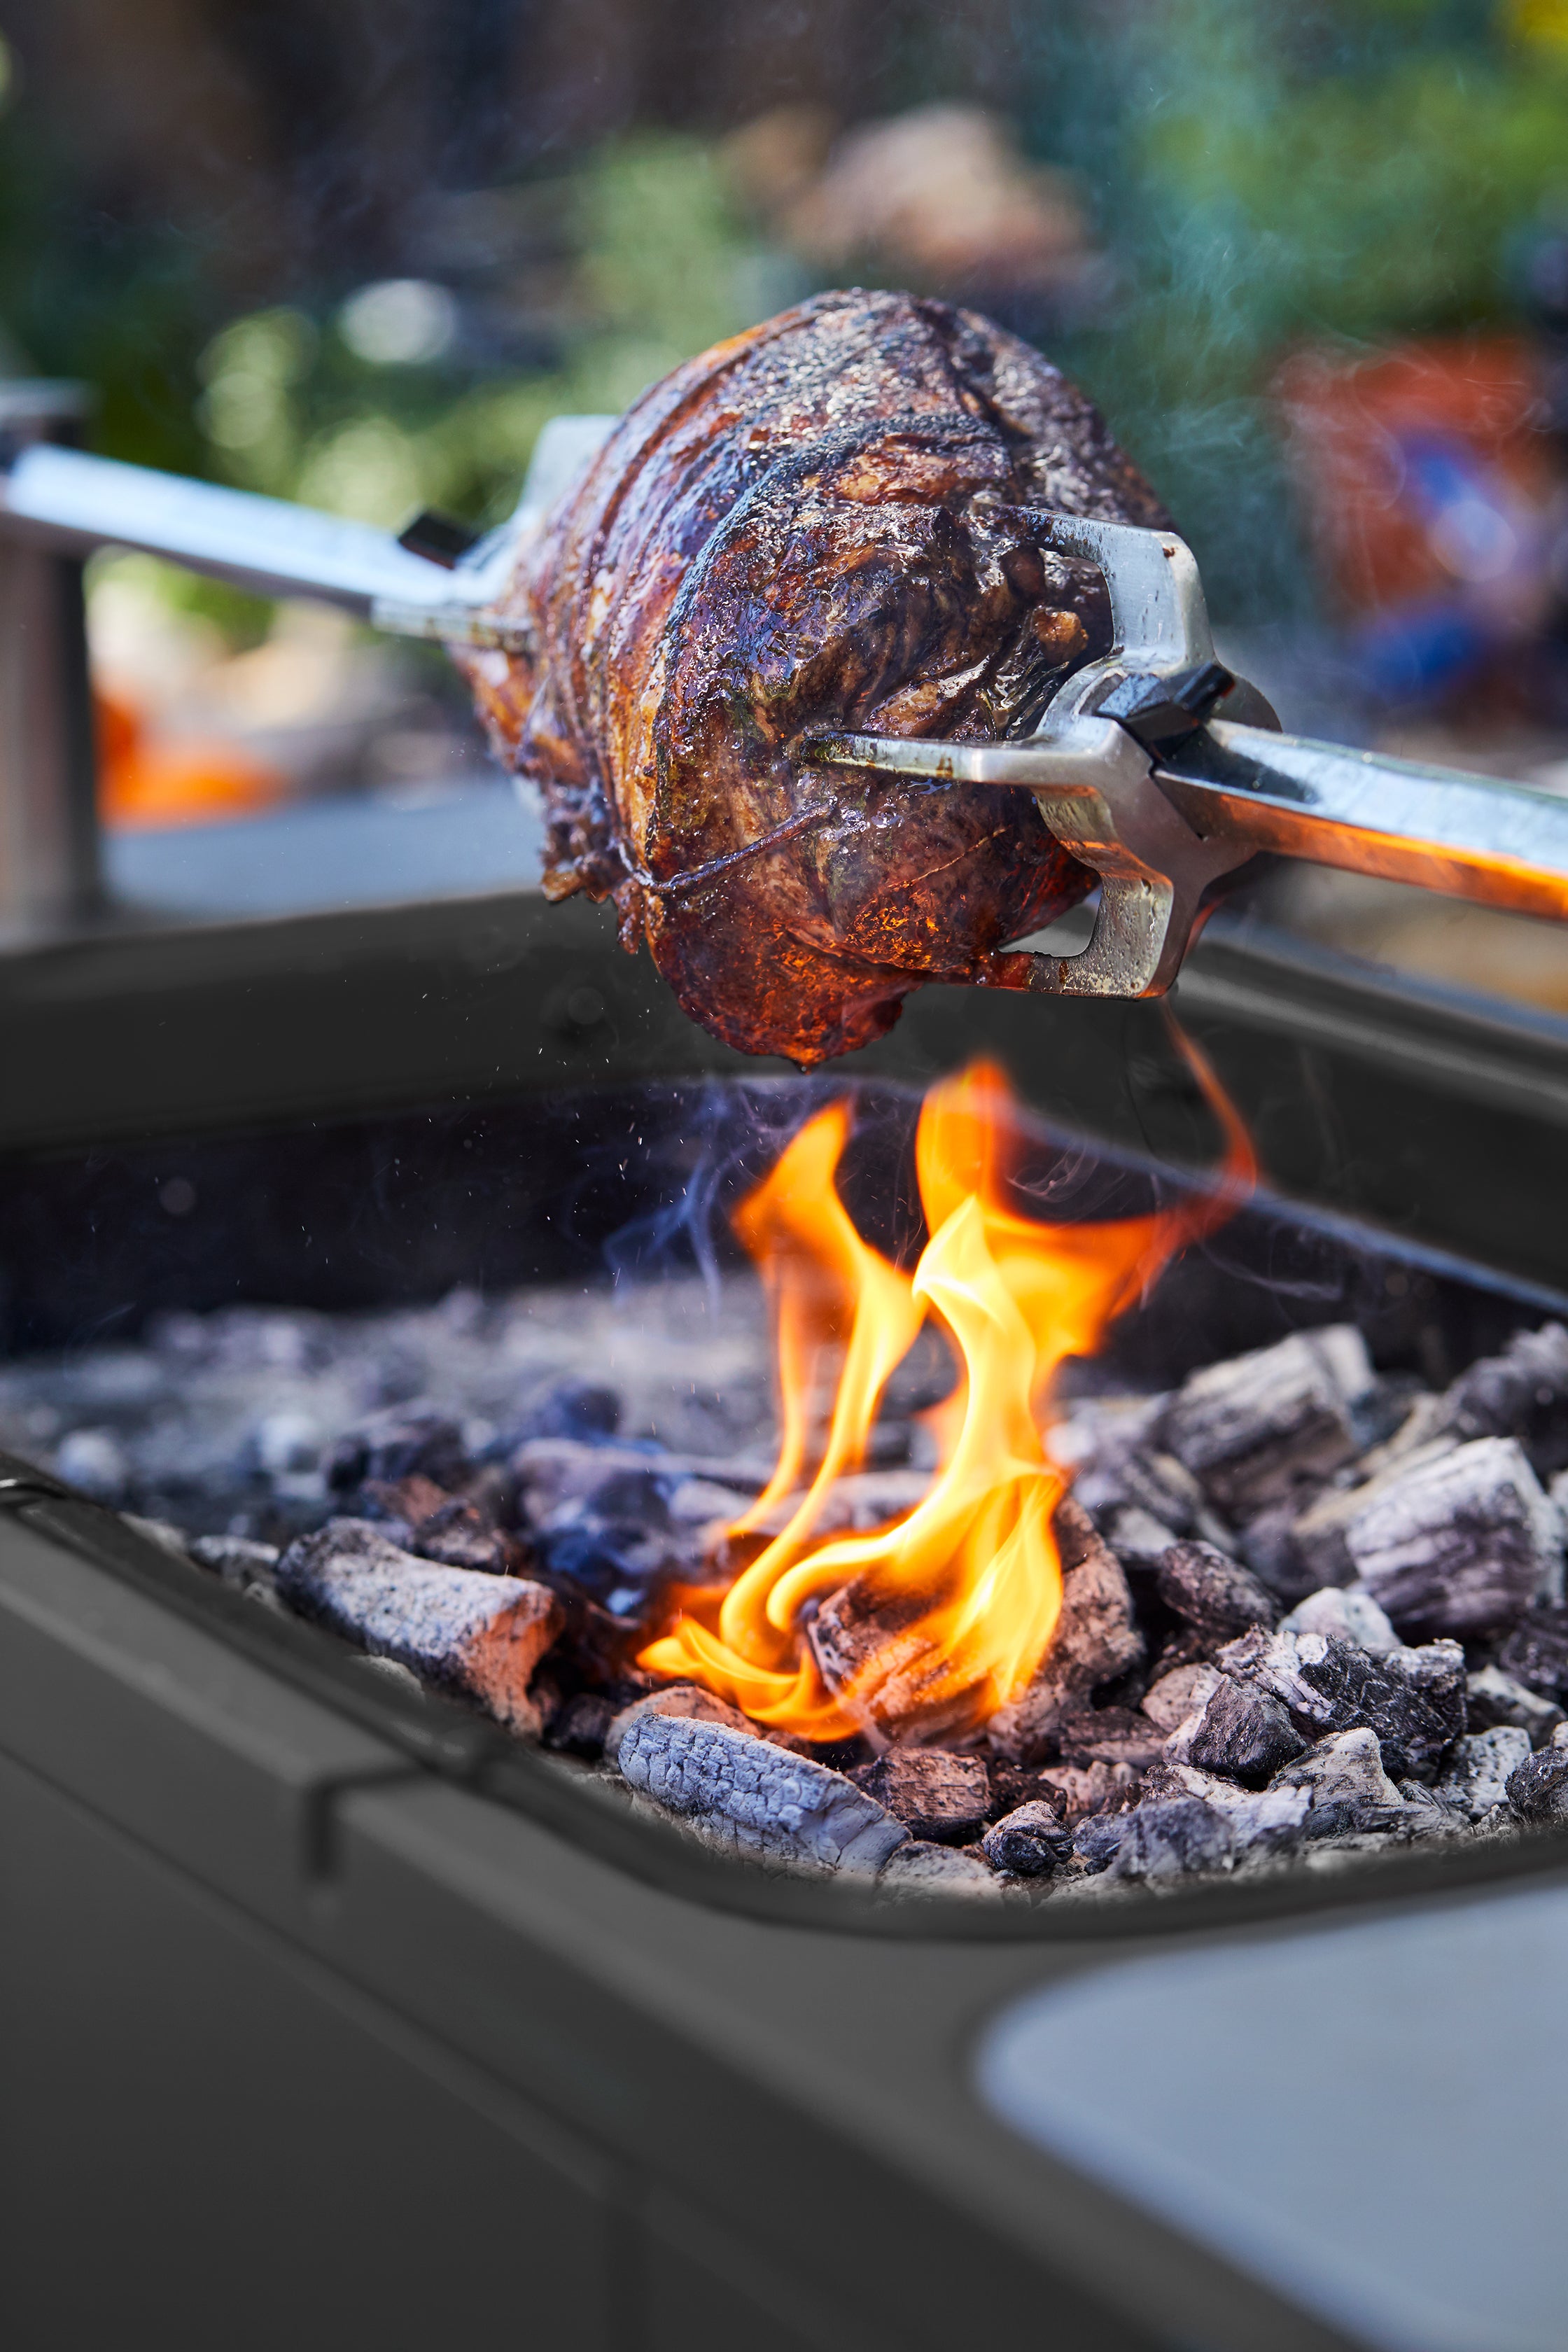 Everdure HUB Charcoal Grill w/ Electric Ignition